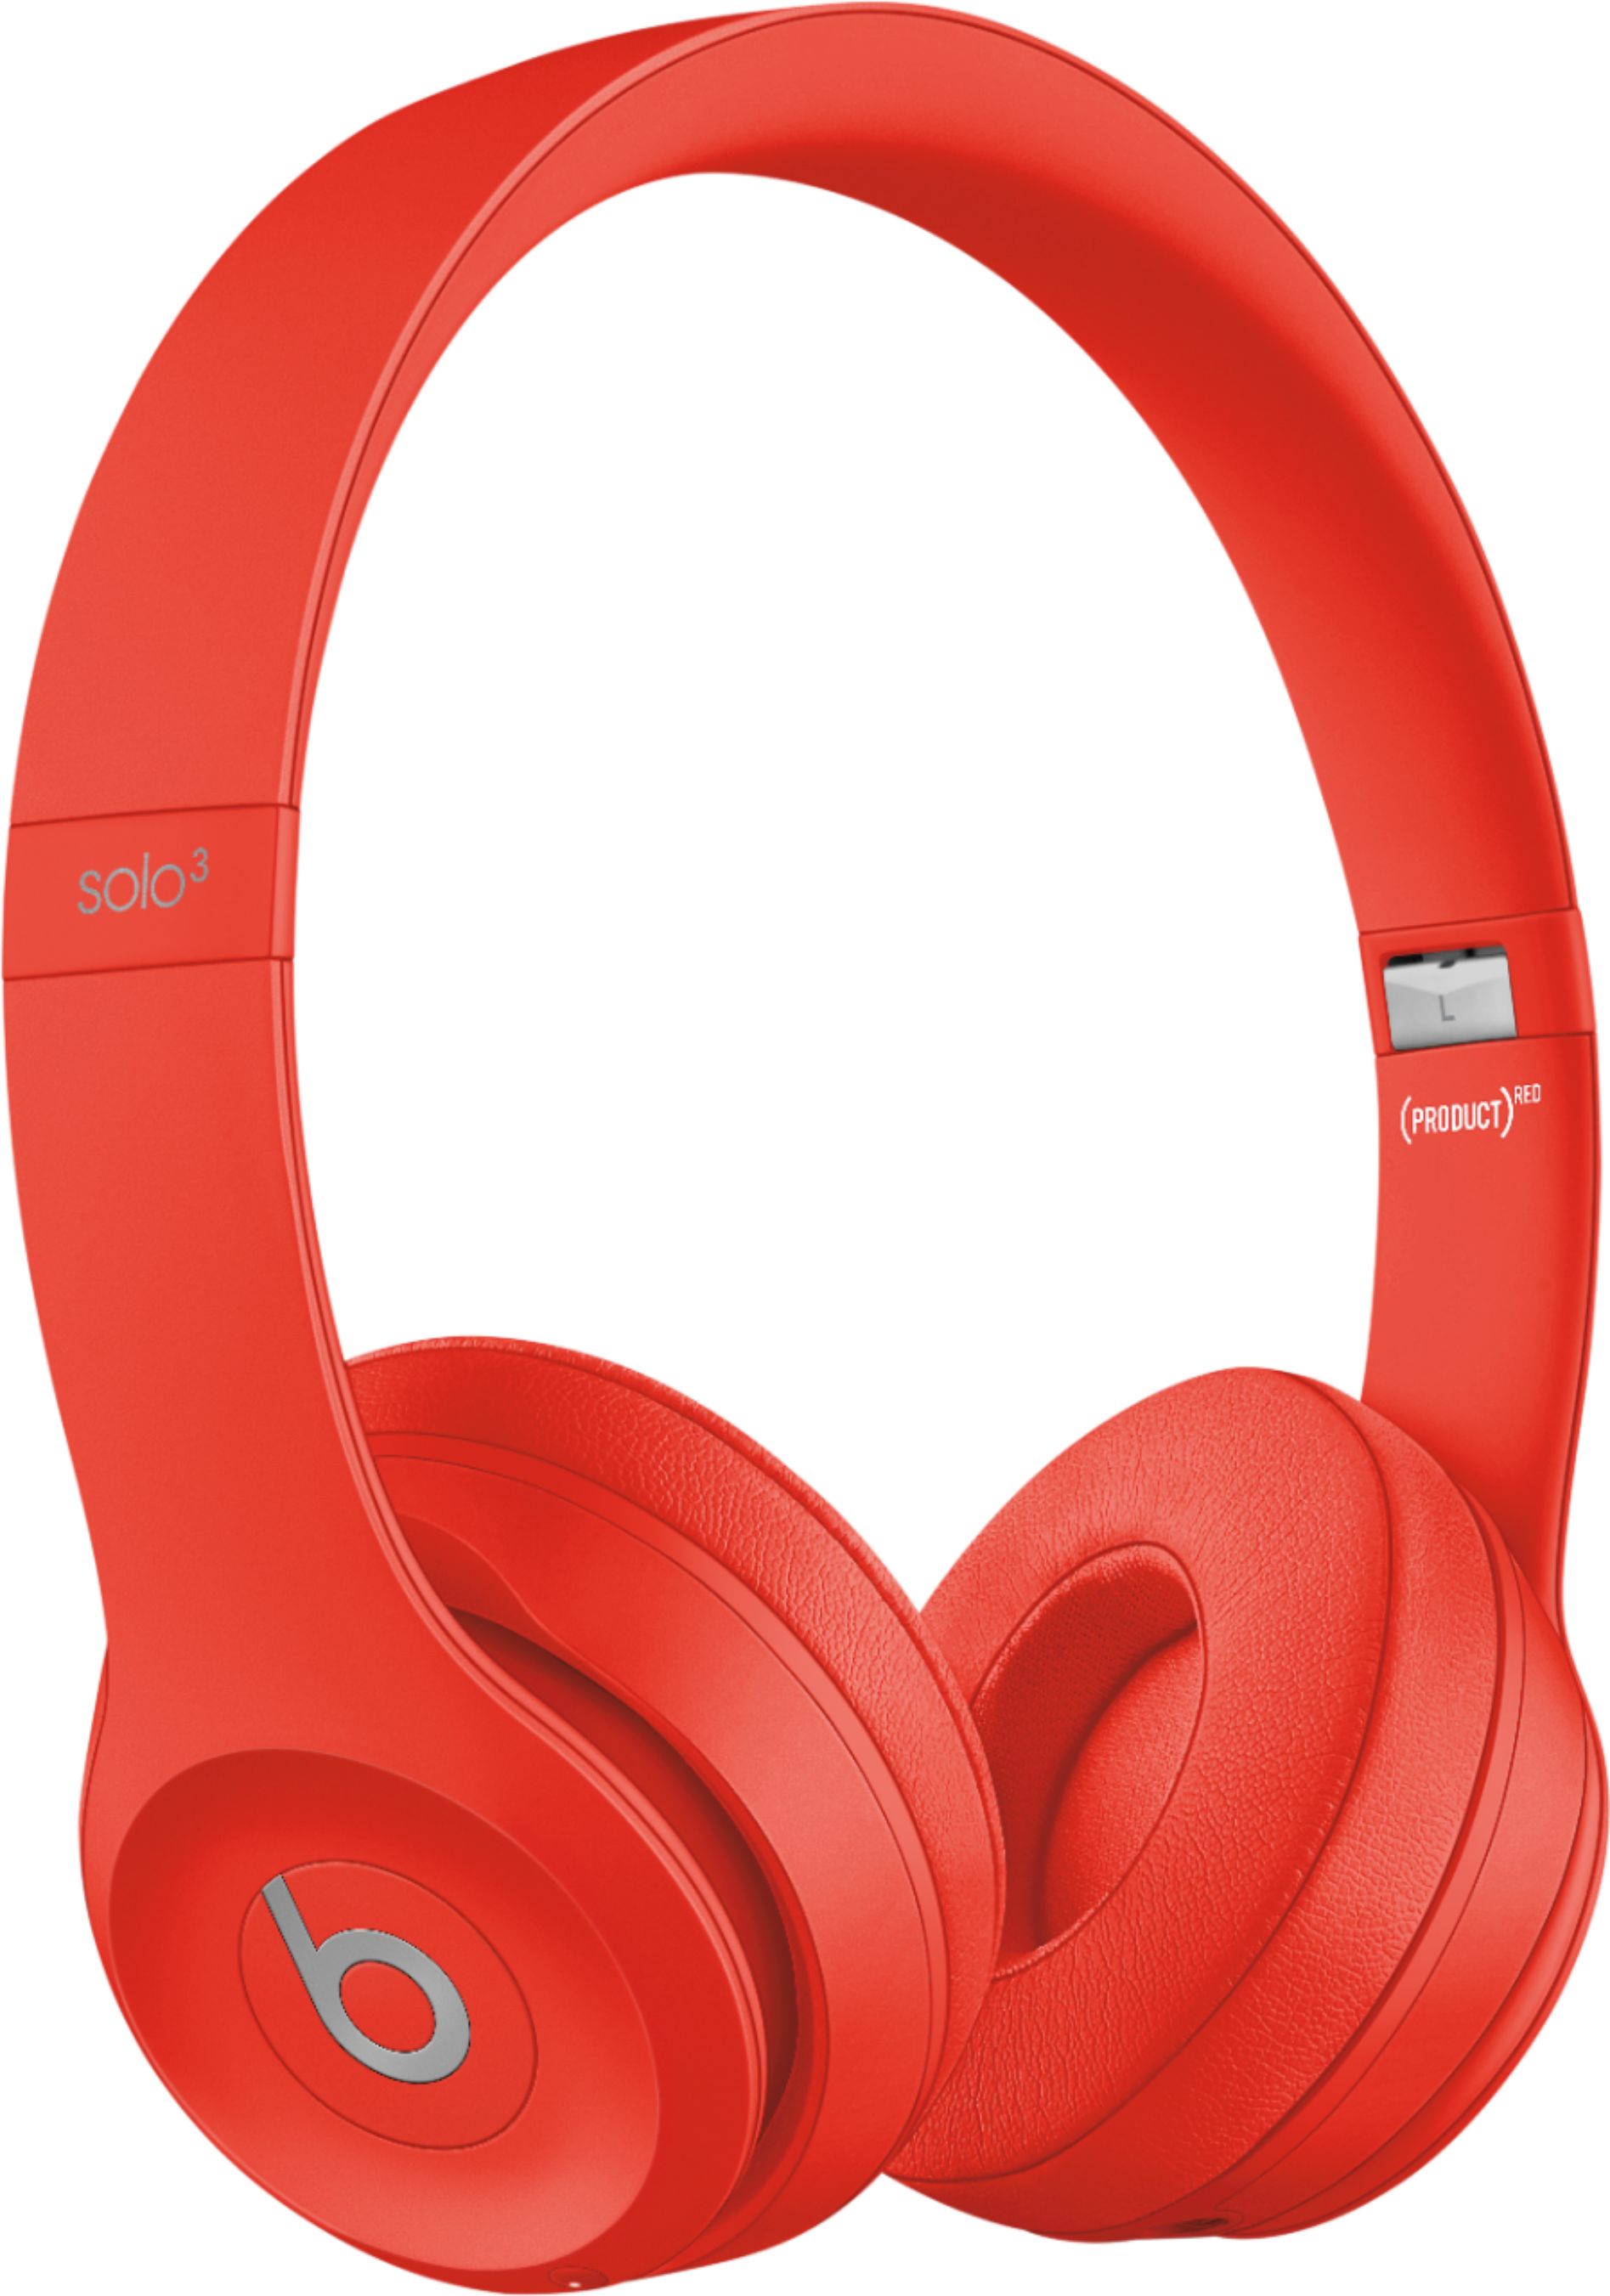 Beats by Dr. Dre Solo³ Wireless On-Ear Headphones (PRODUCT 